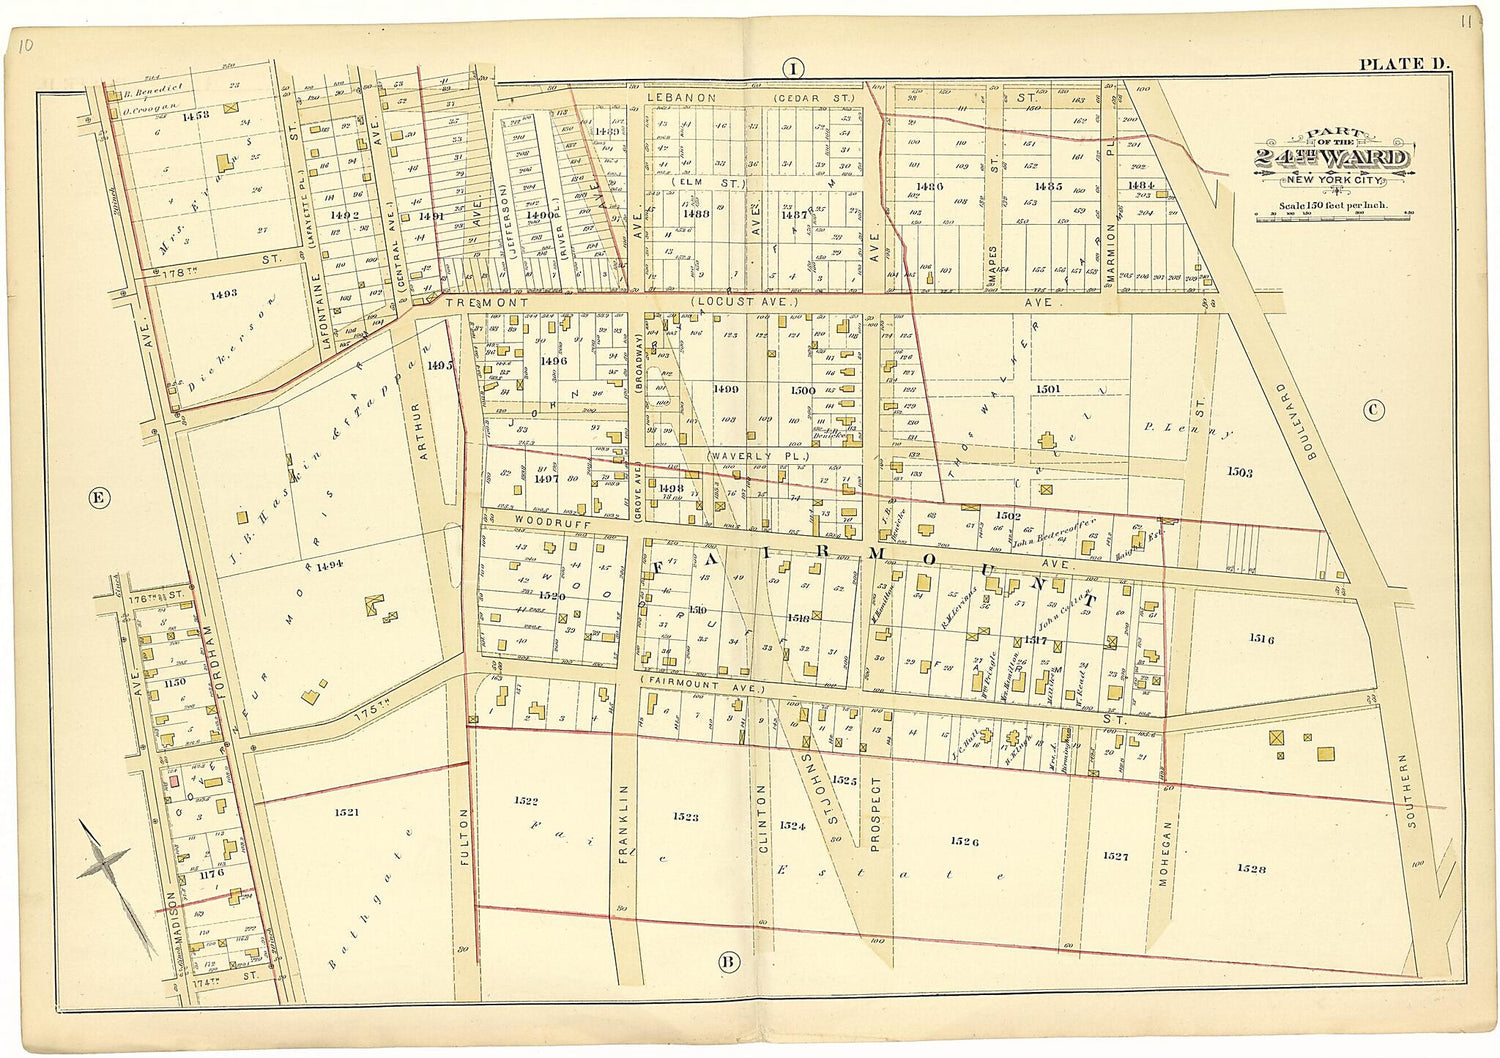 This old map of Part of the 24th Ward New York City - Plate D from Atlas of the Twenty Fourth Ward, New York City from 1882 was created by A. H. (August H.) Mueller in 1882